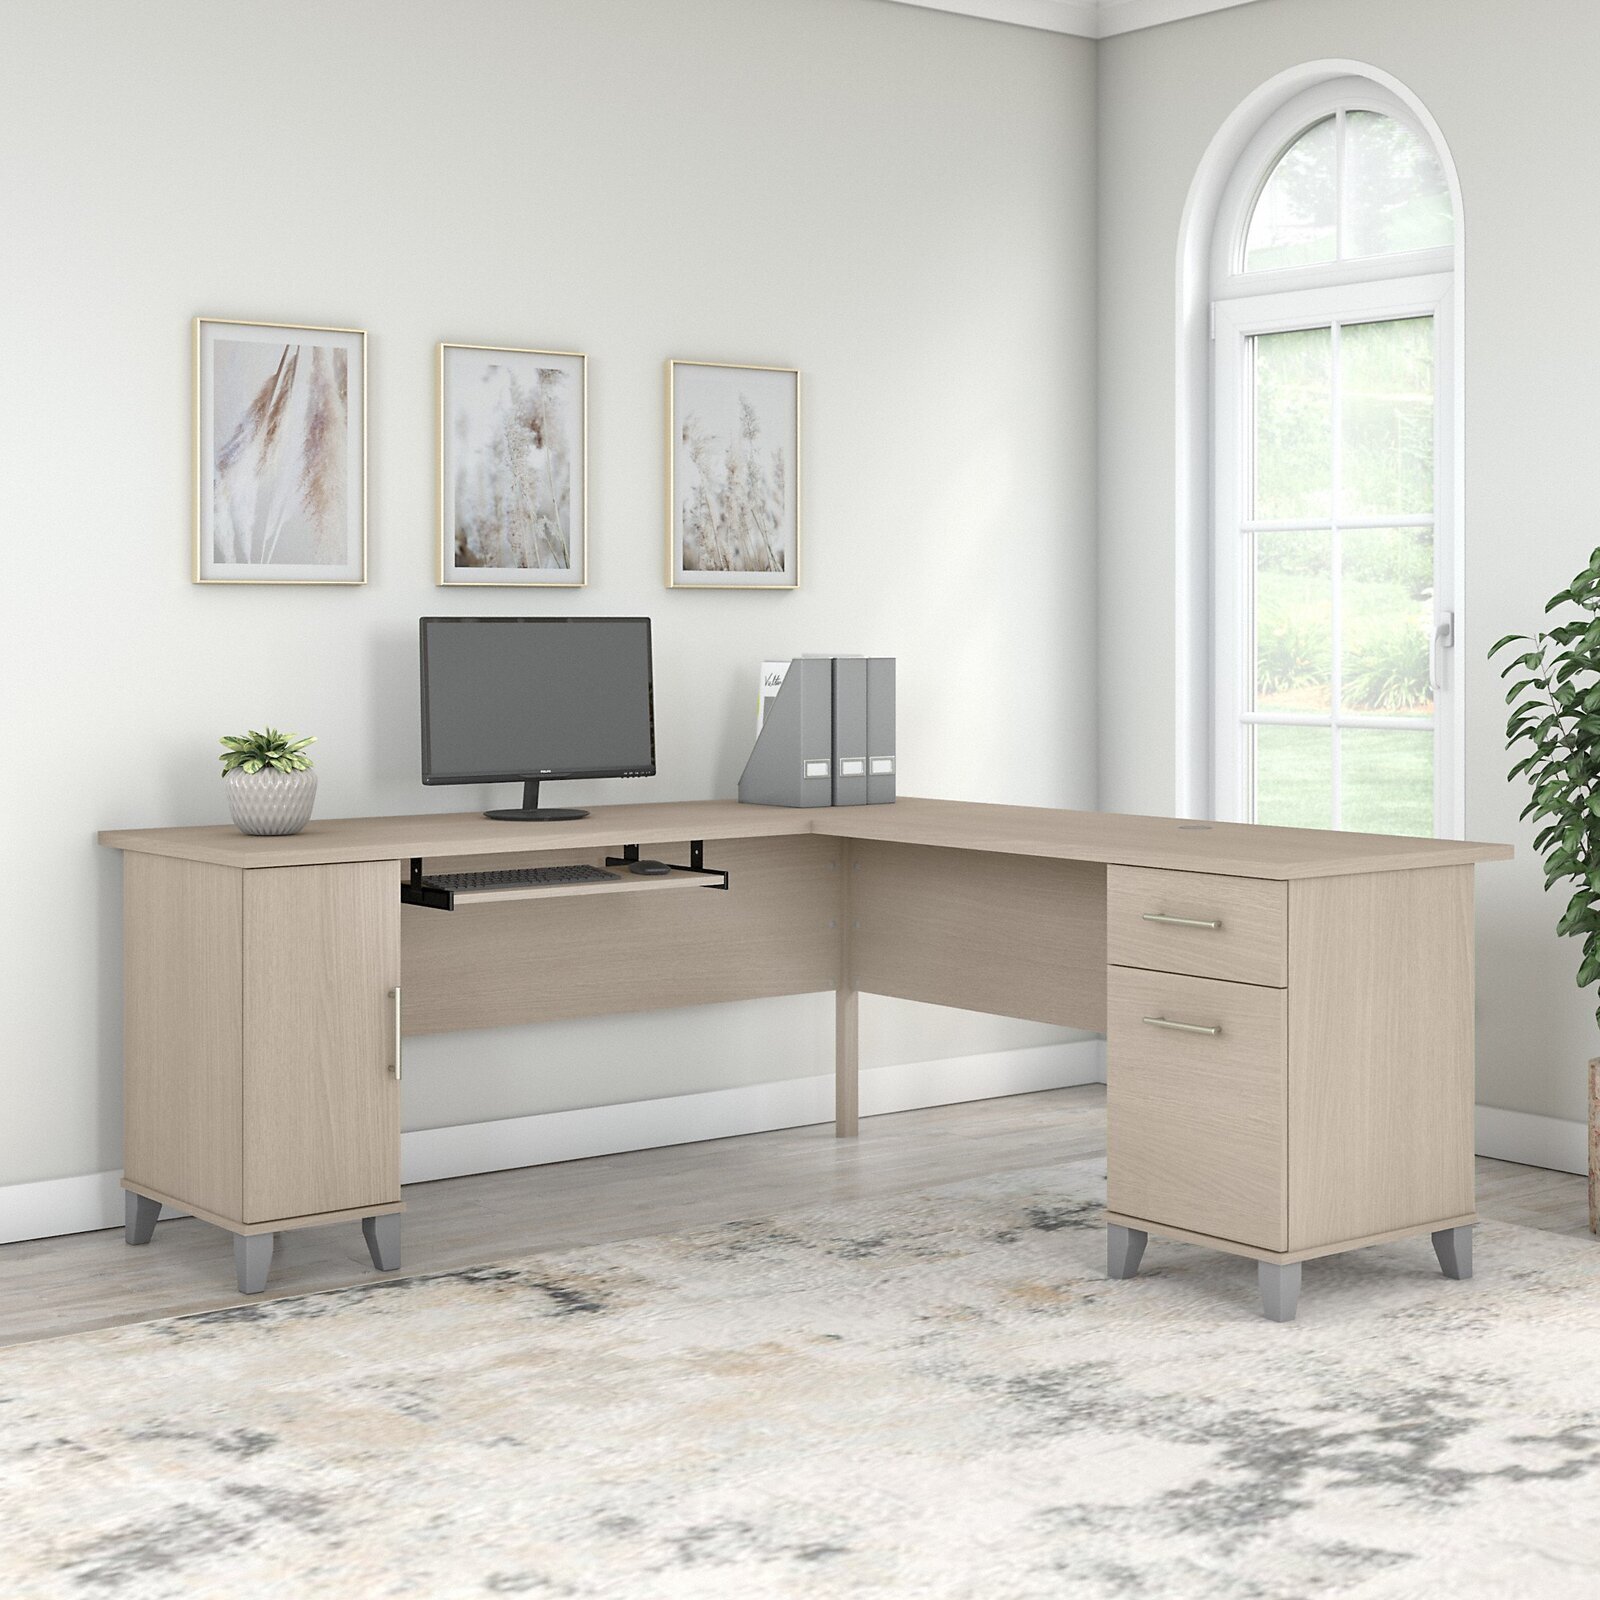 Minimalist Office Desk For Home